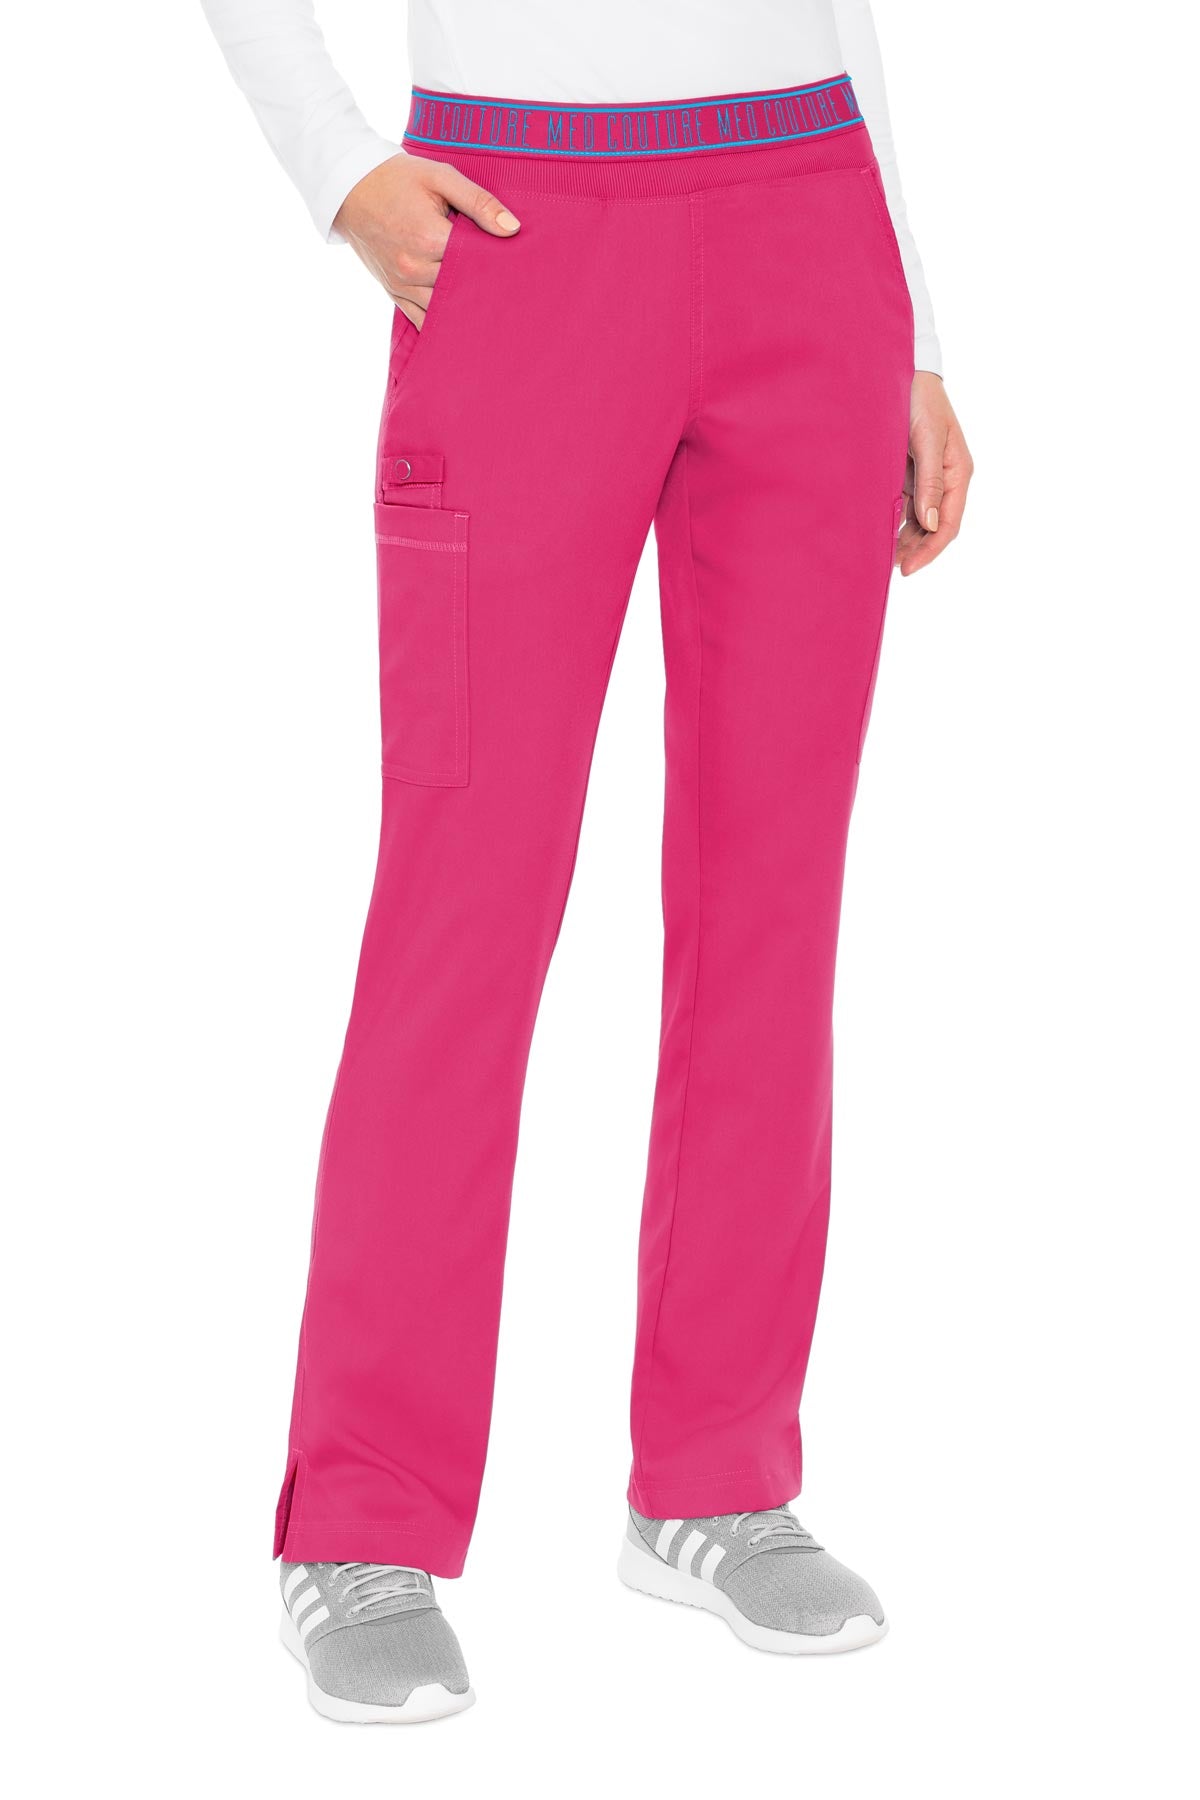 Med Couture Pink Punch PANT